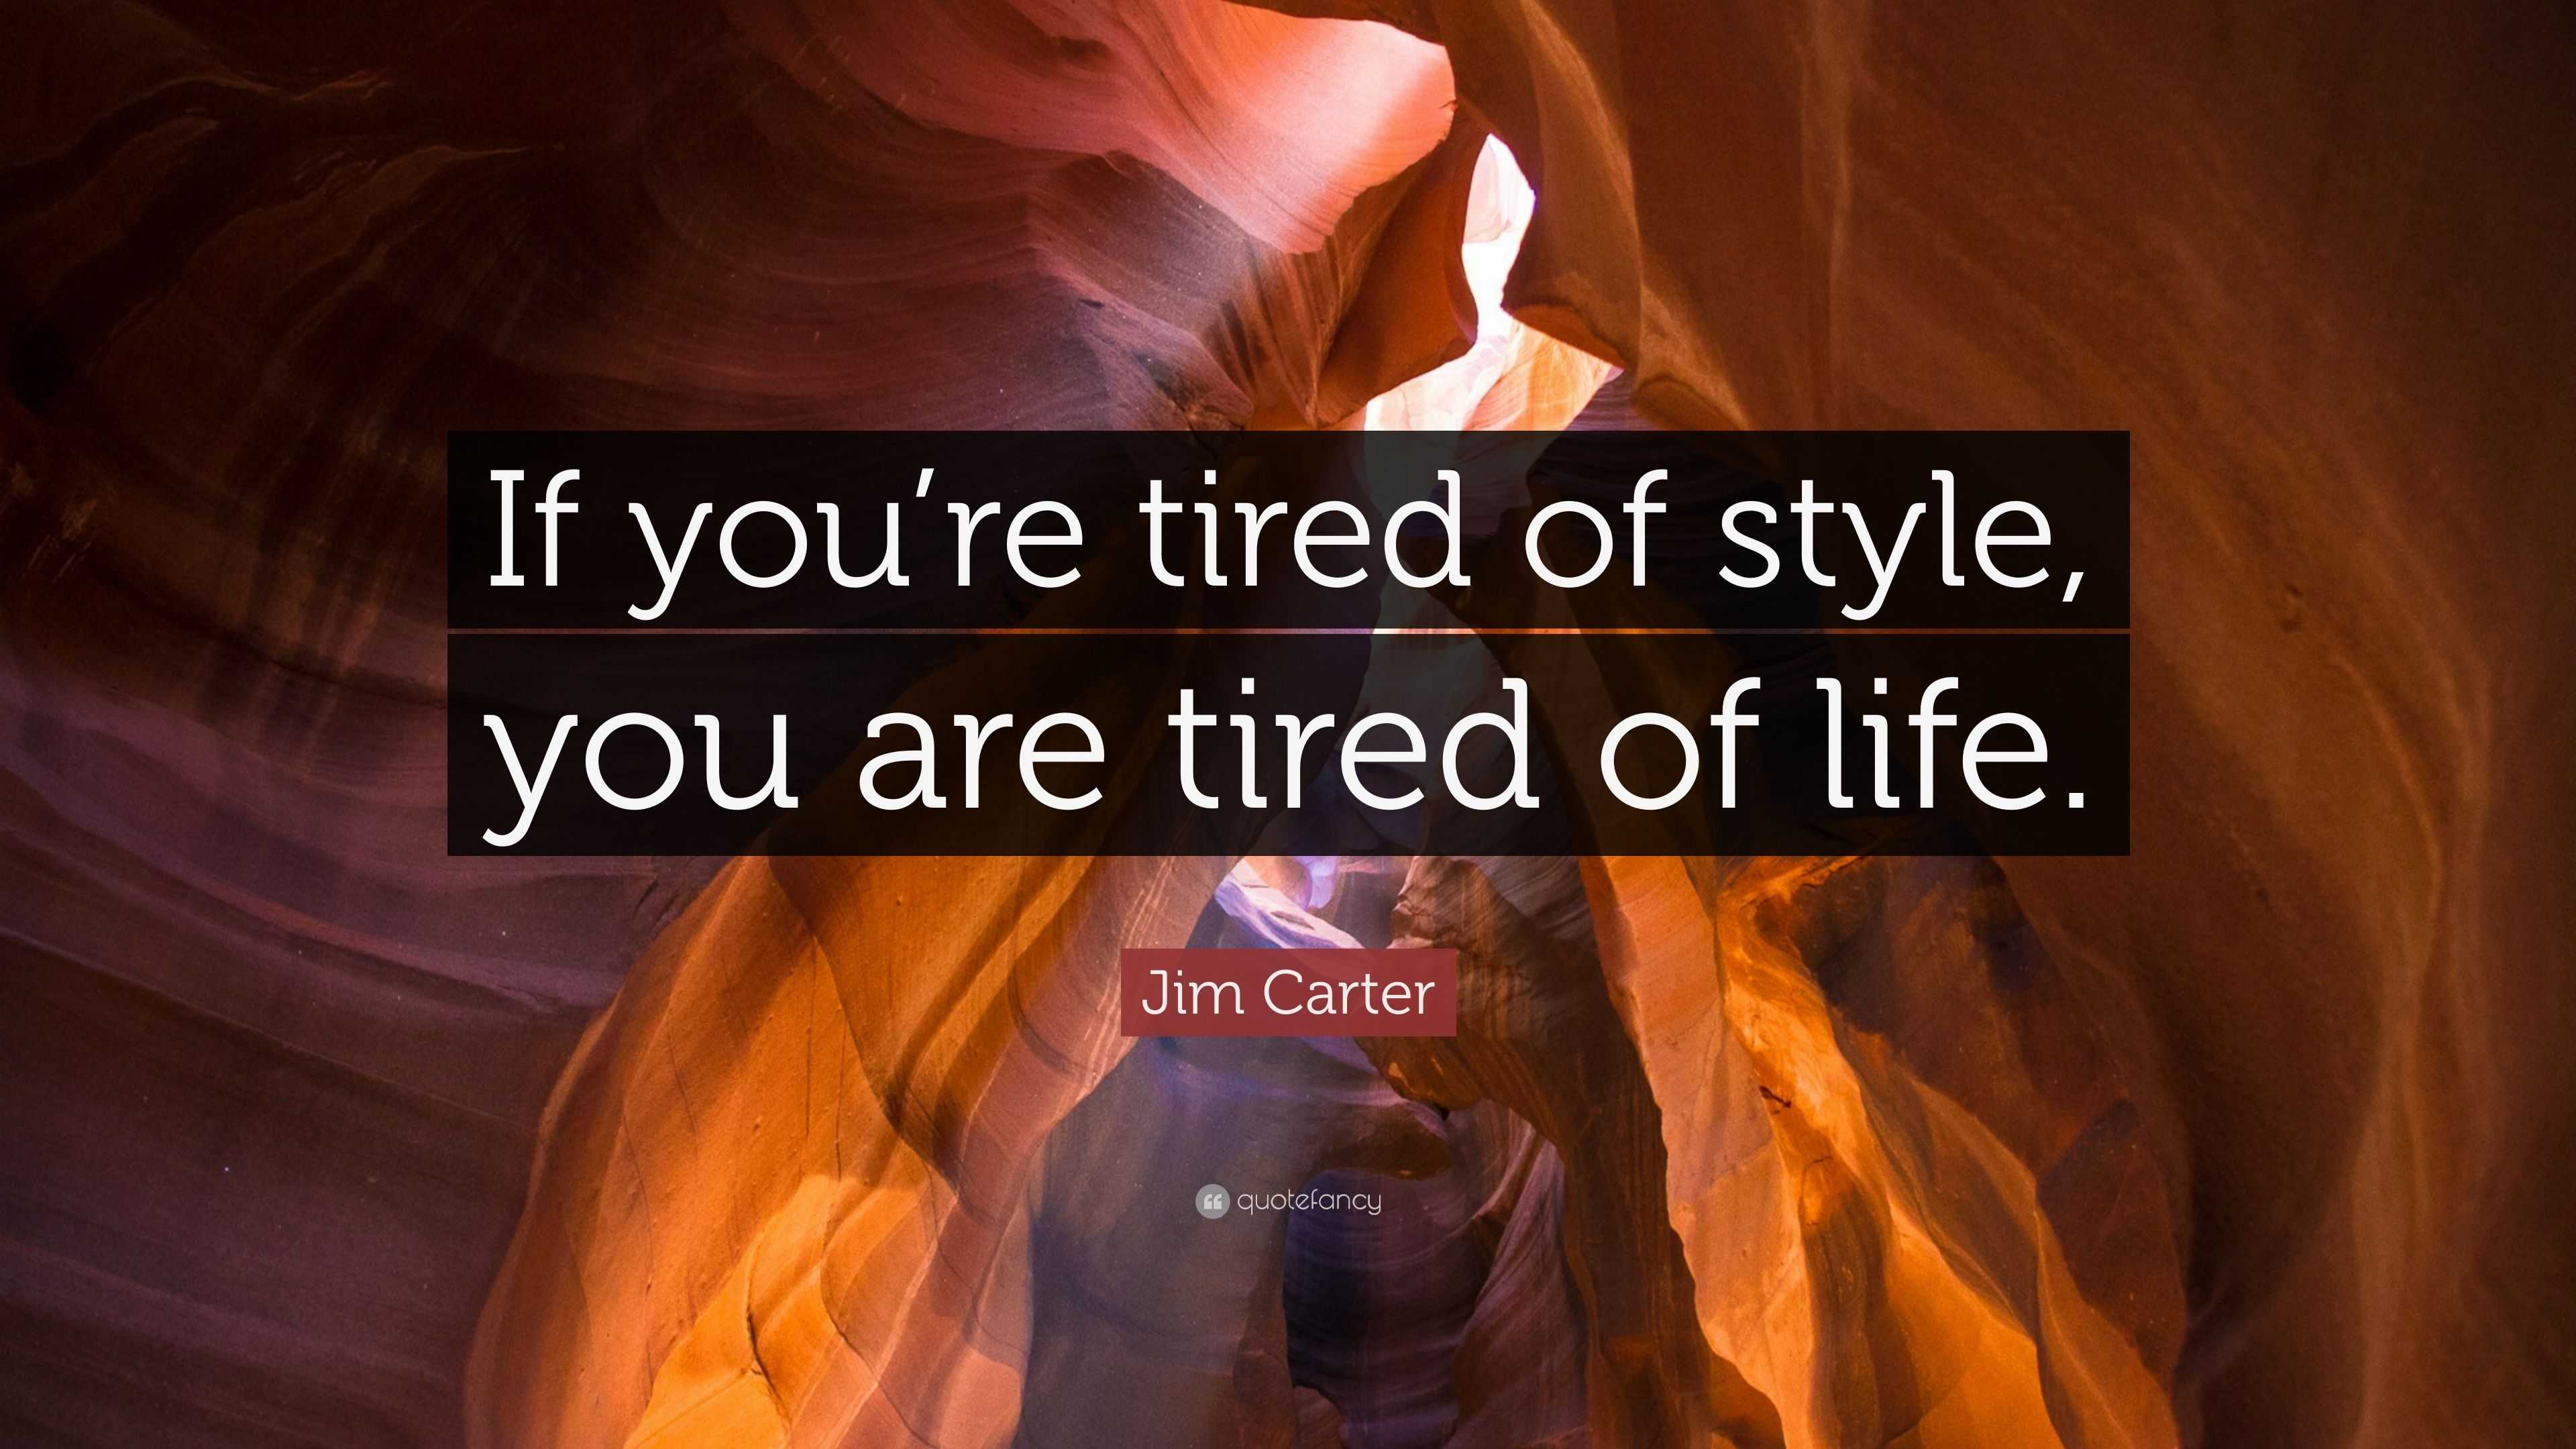 Jim Carter Quote “If you’re tired of style, you are tired